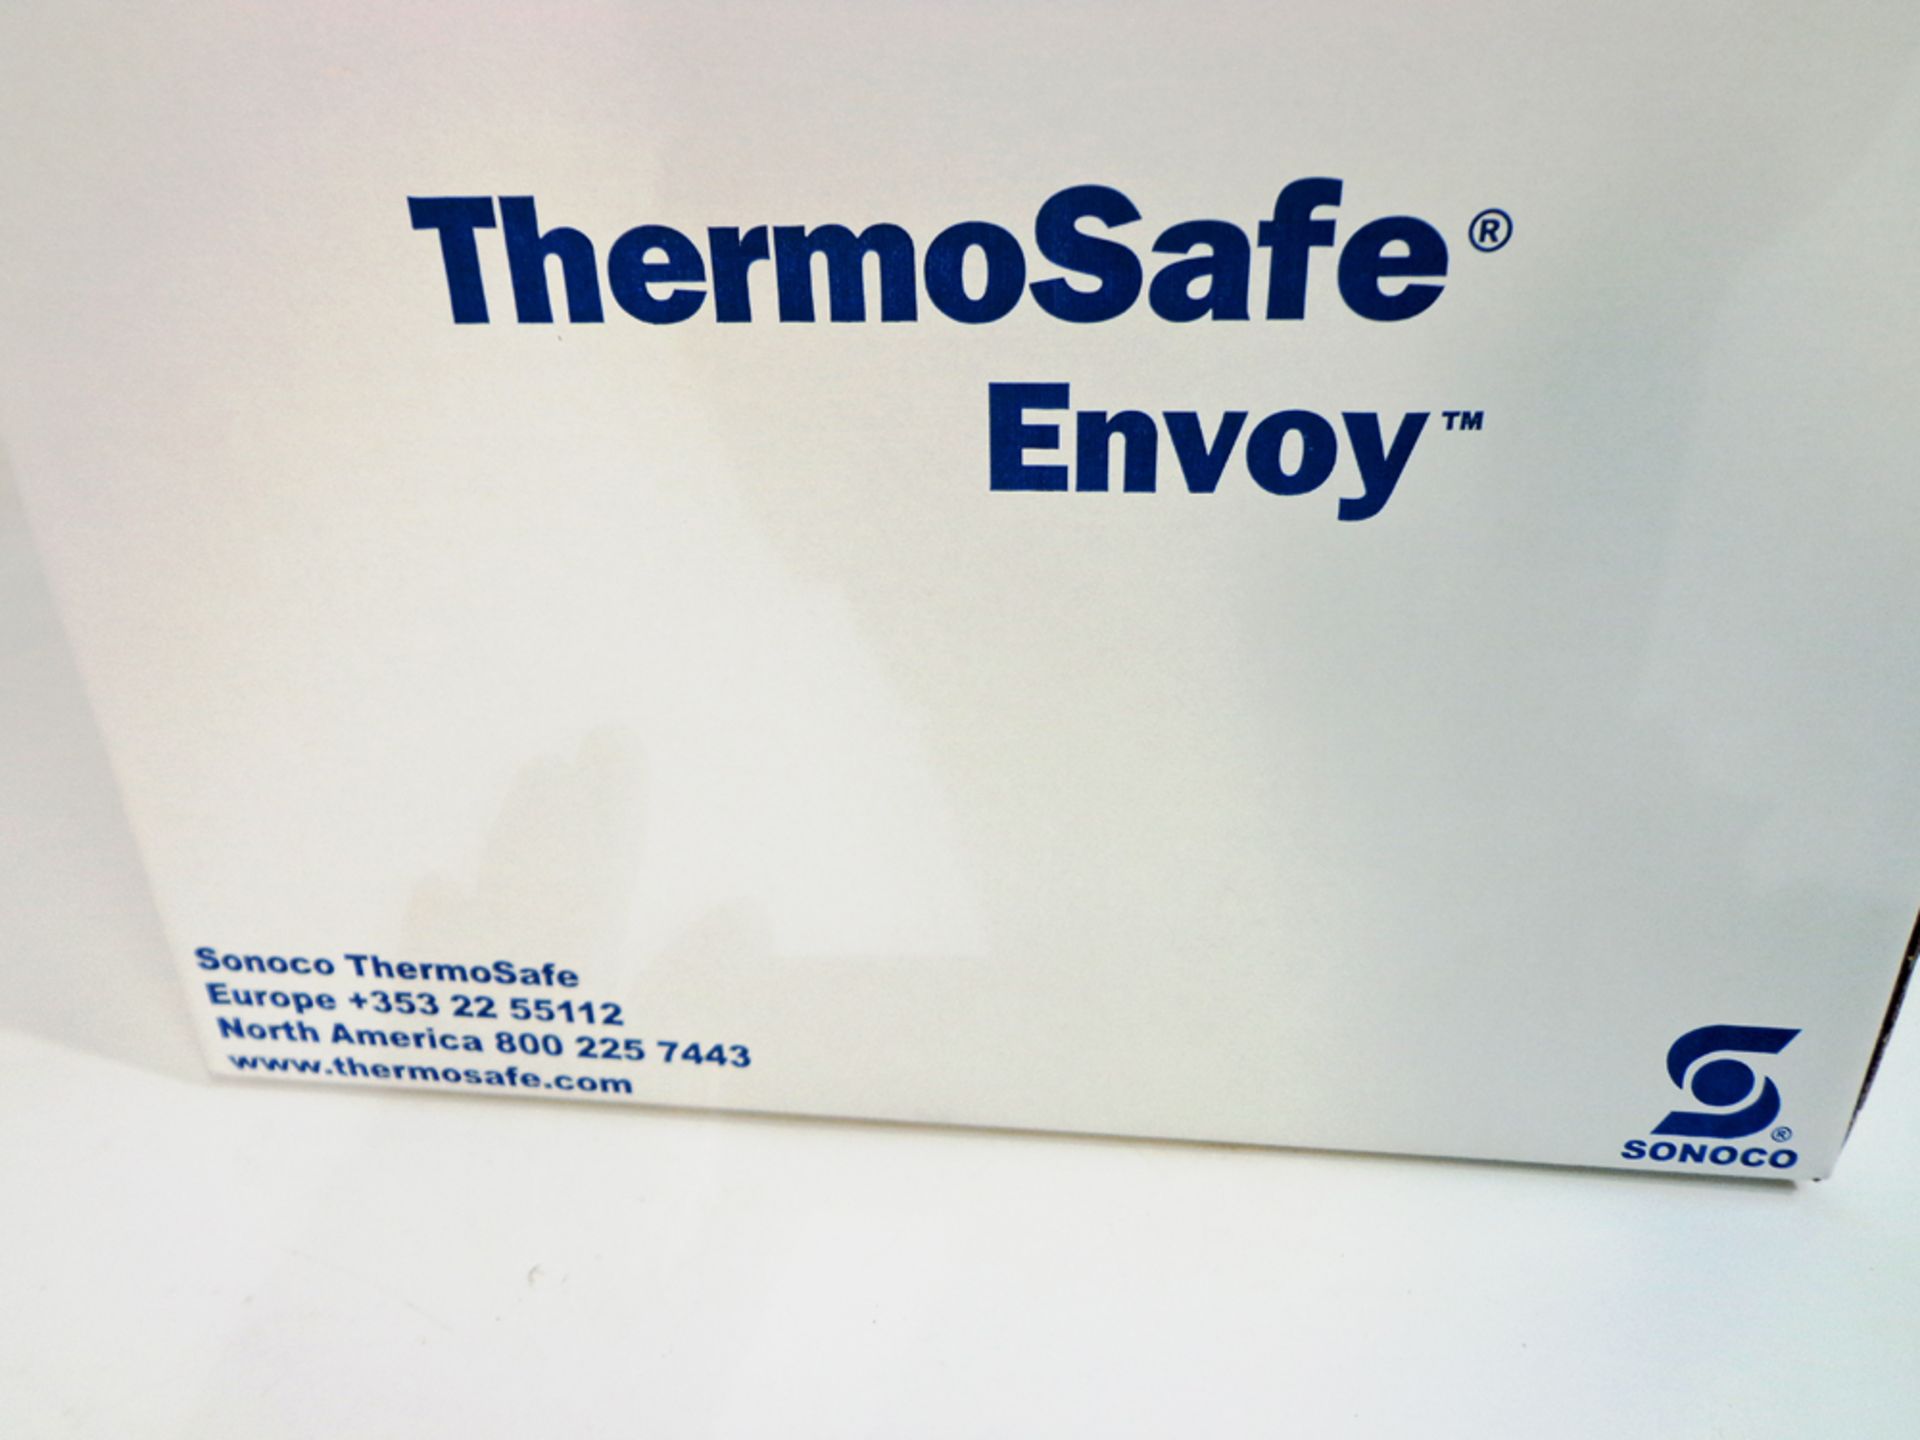 Sonoco ThermoSafe Envoy Insulated Container (each). - Image 3 of 8